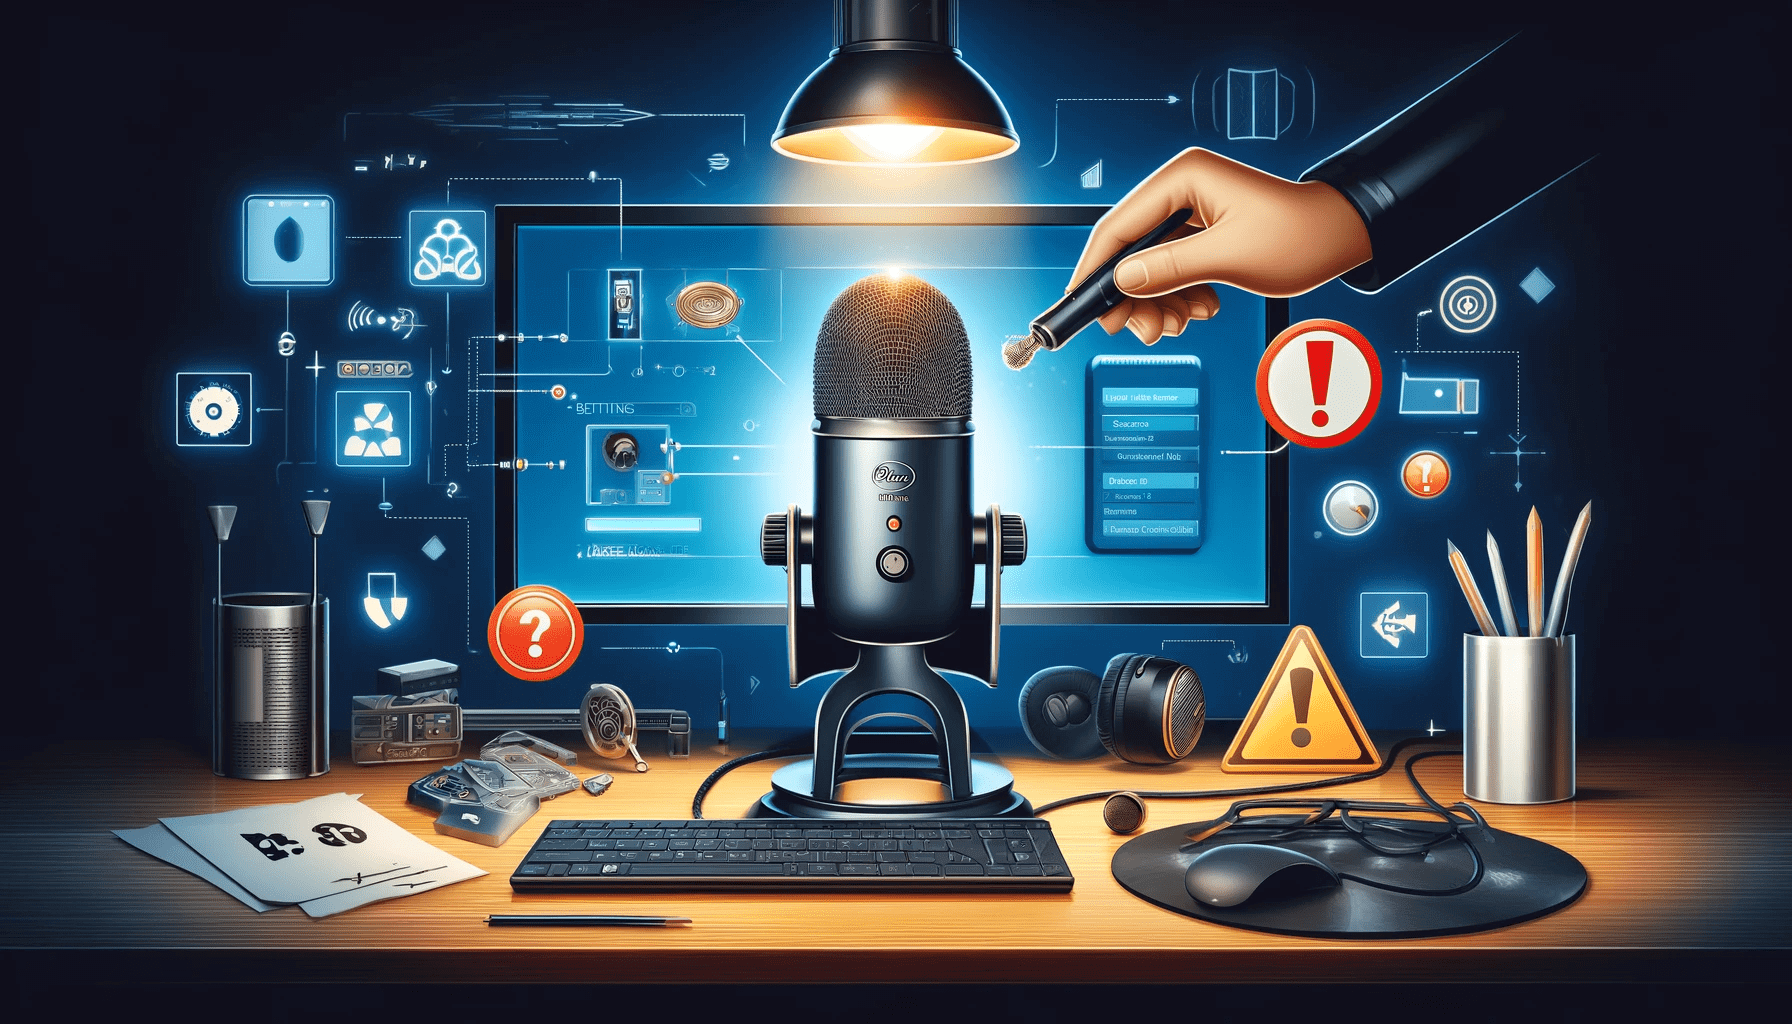 How to Fix Blue Yeti Microphone Not Detected or Recognized in Windows 10 and 11?